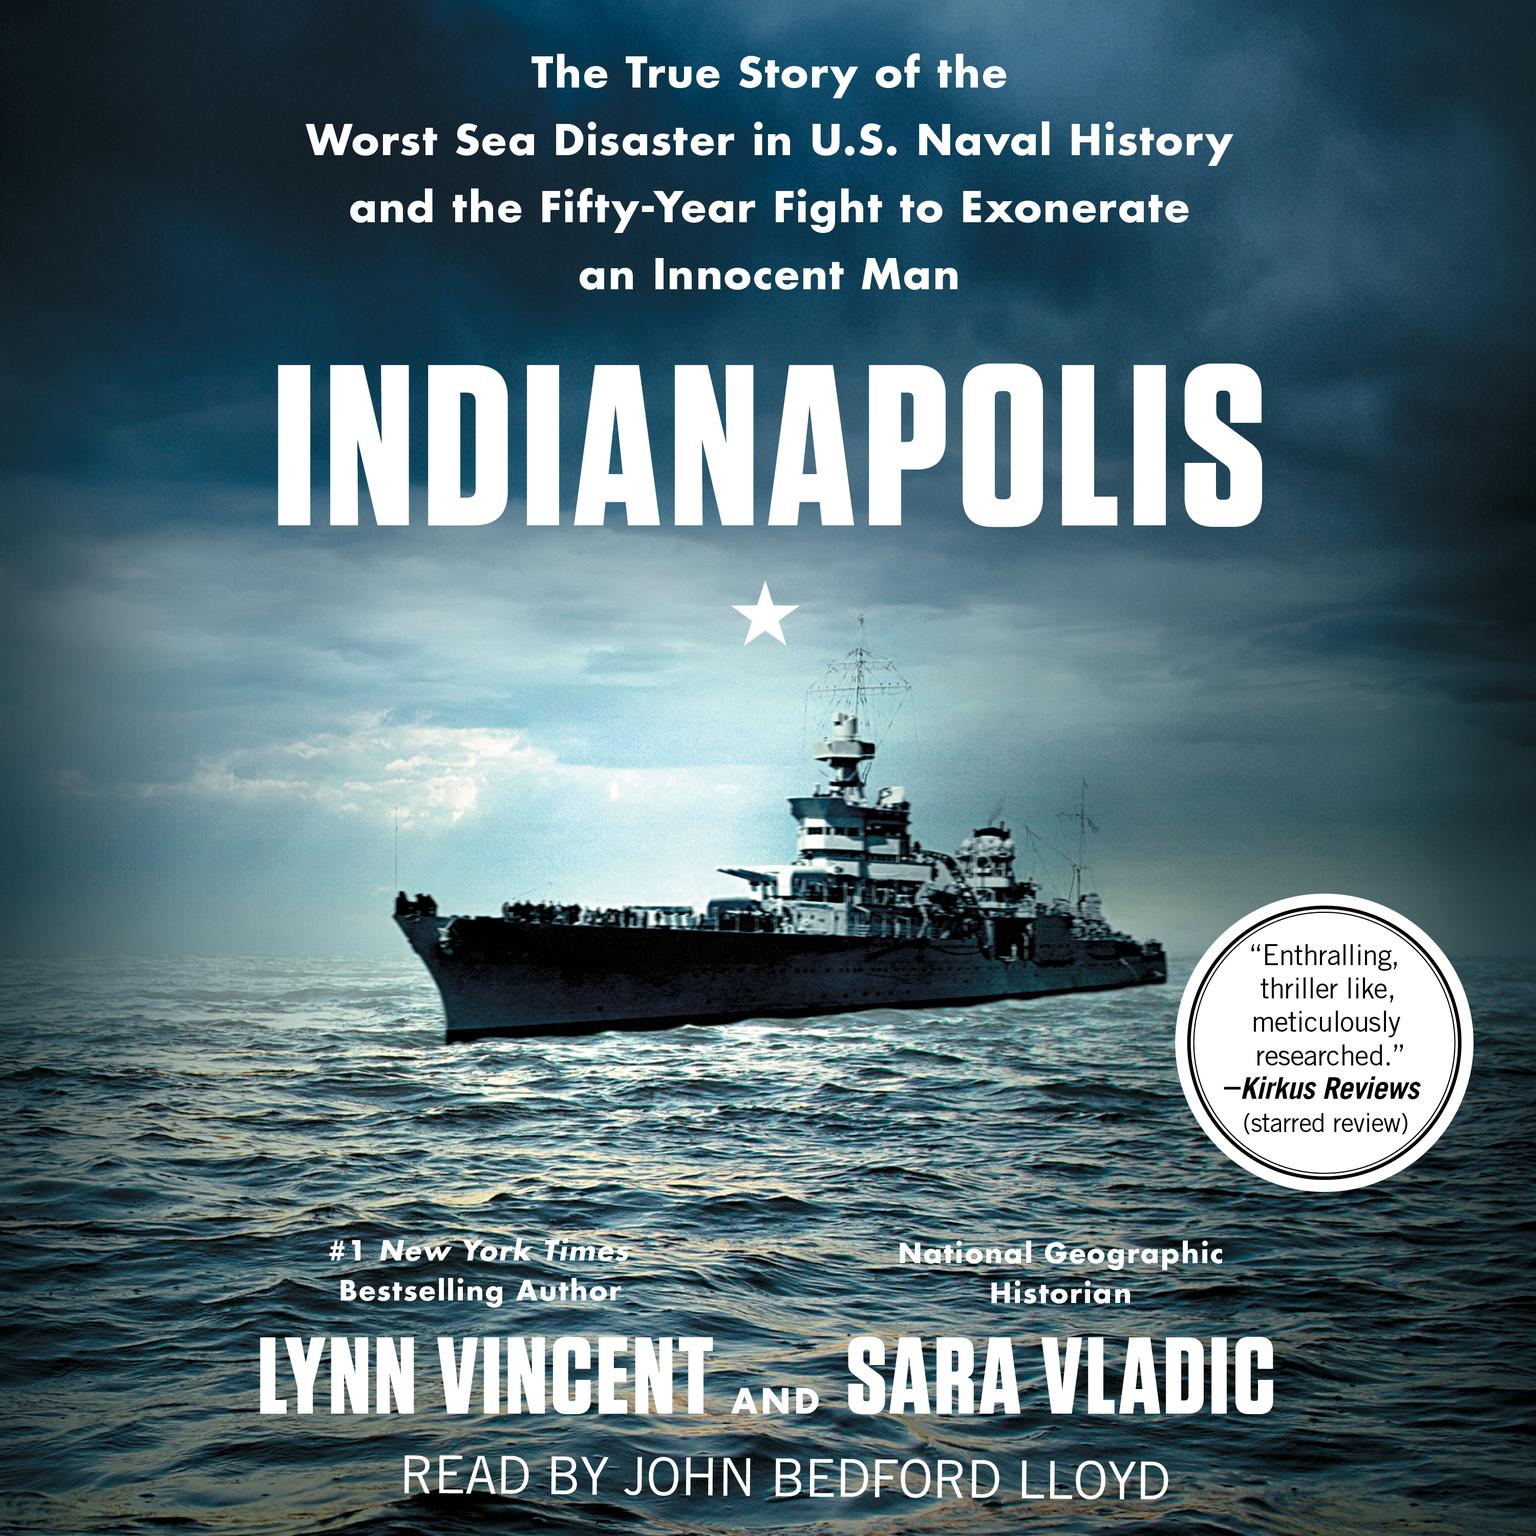 Indianapolis: The True Story of the Worst Sea Disaster in U.S. Naval History and the Fifty-Year Fight to Exonerate an Innocent Man Audiobook, by Lynn Vincent